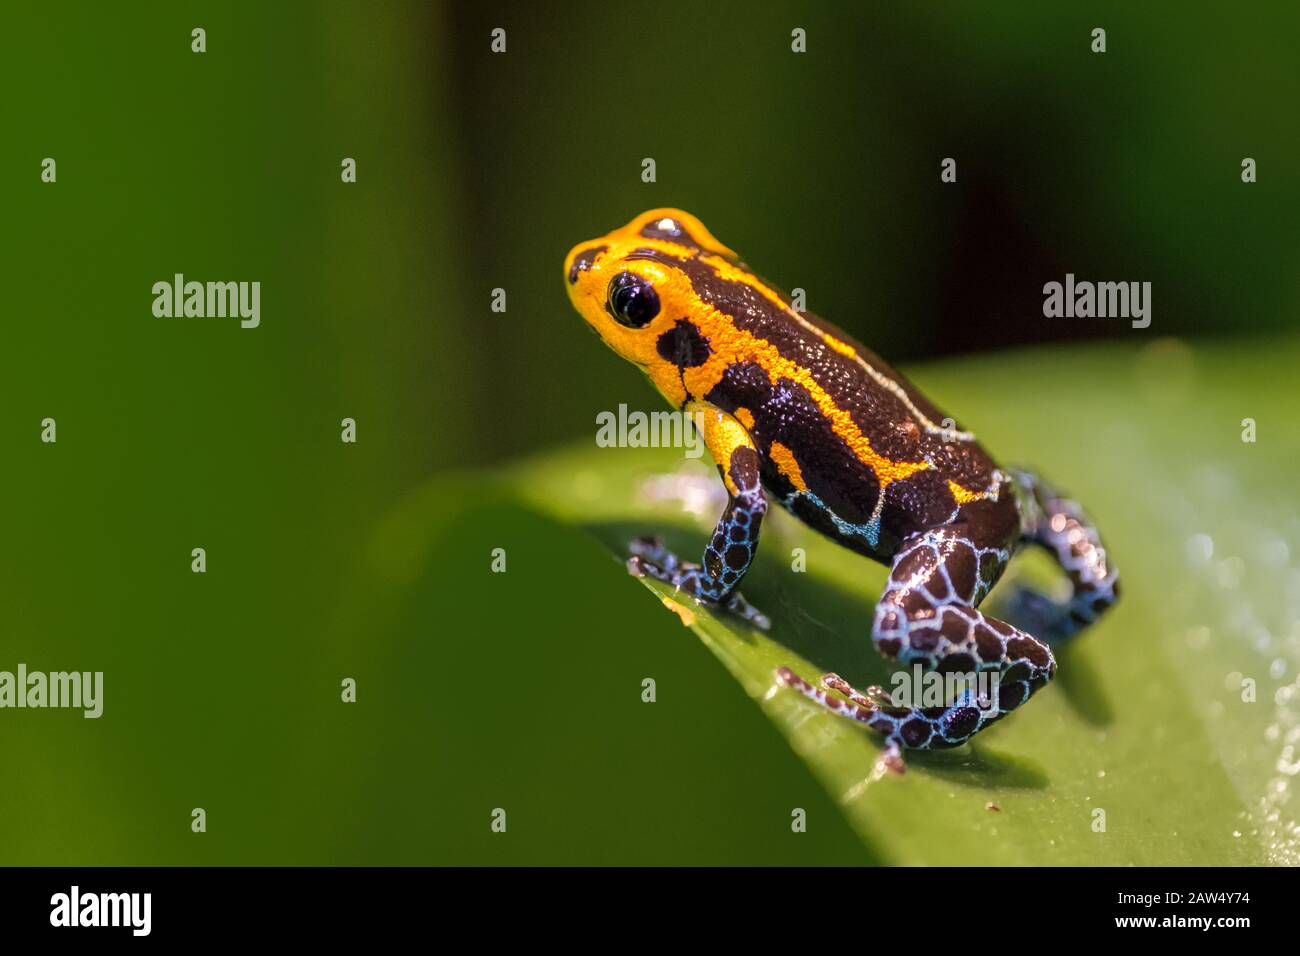 Mimic Poison Frog or poison arrow frog on a leaf Stock Photo